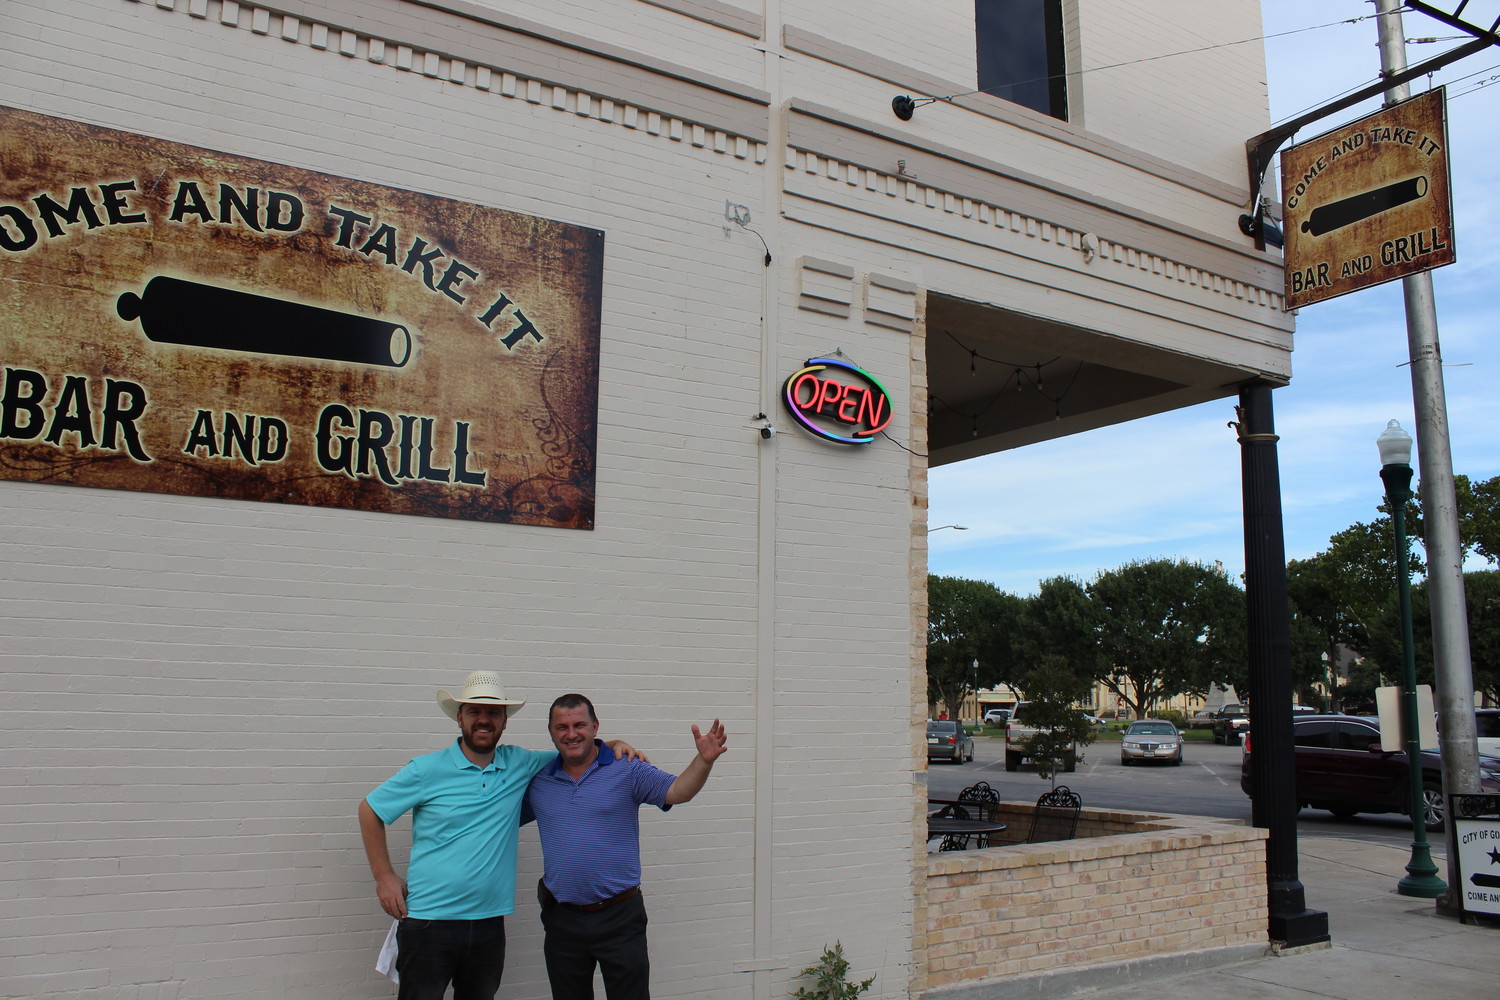 Besard “Besi” Gegaj and Gasper Lekgega are the proud proprietors of the Come and Take It sports bar/restaurant on the northwest corner of Confederate Square.